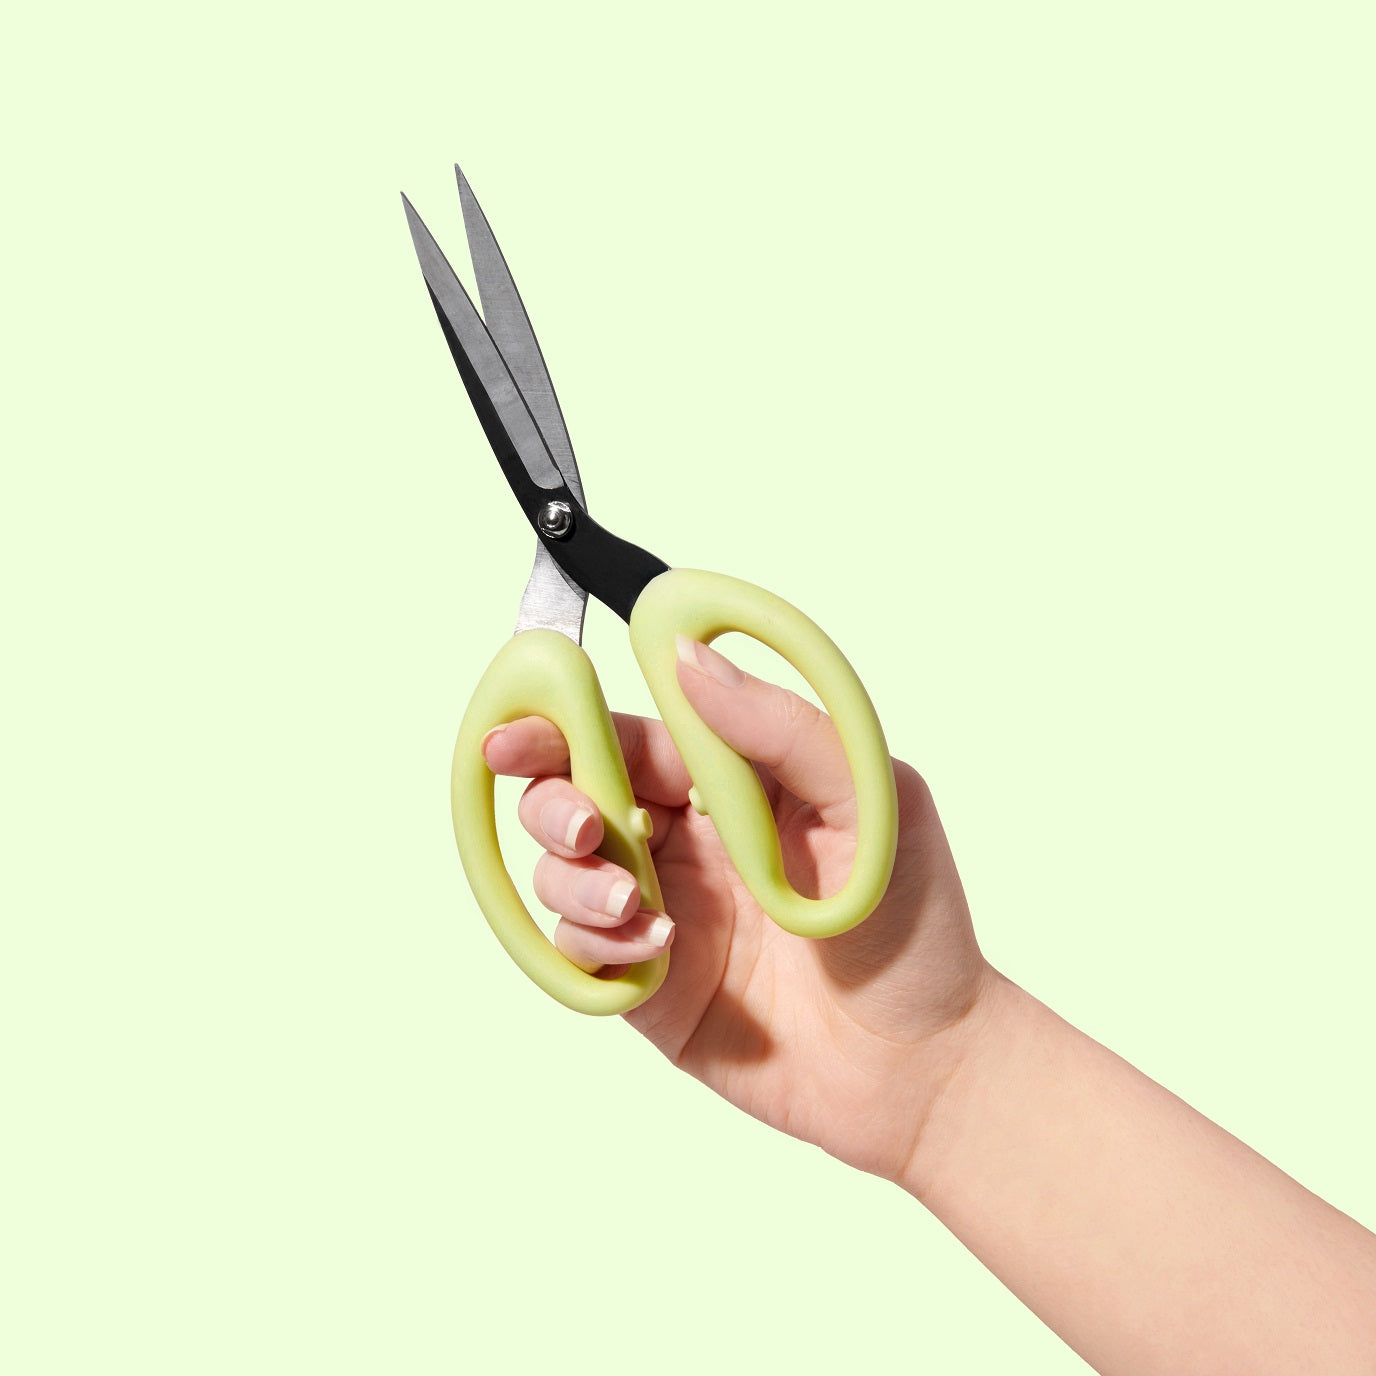 SOHMO Go-To Scissors with serrated blades and green grippy handles